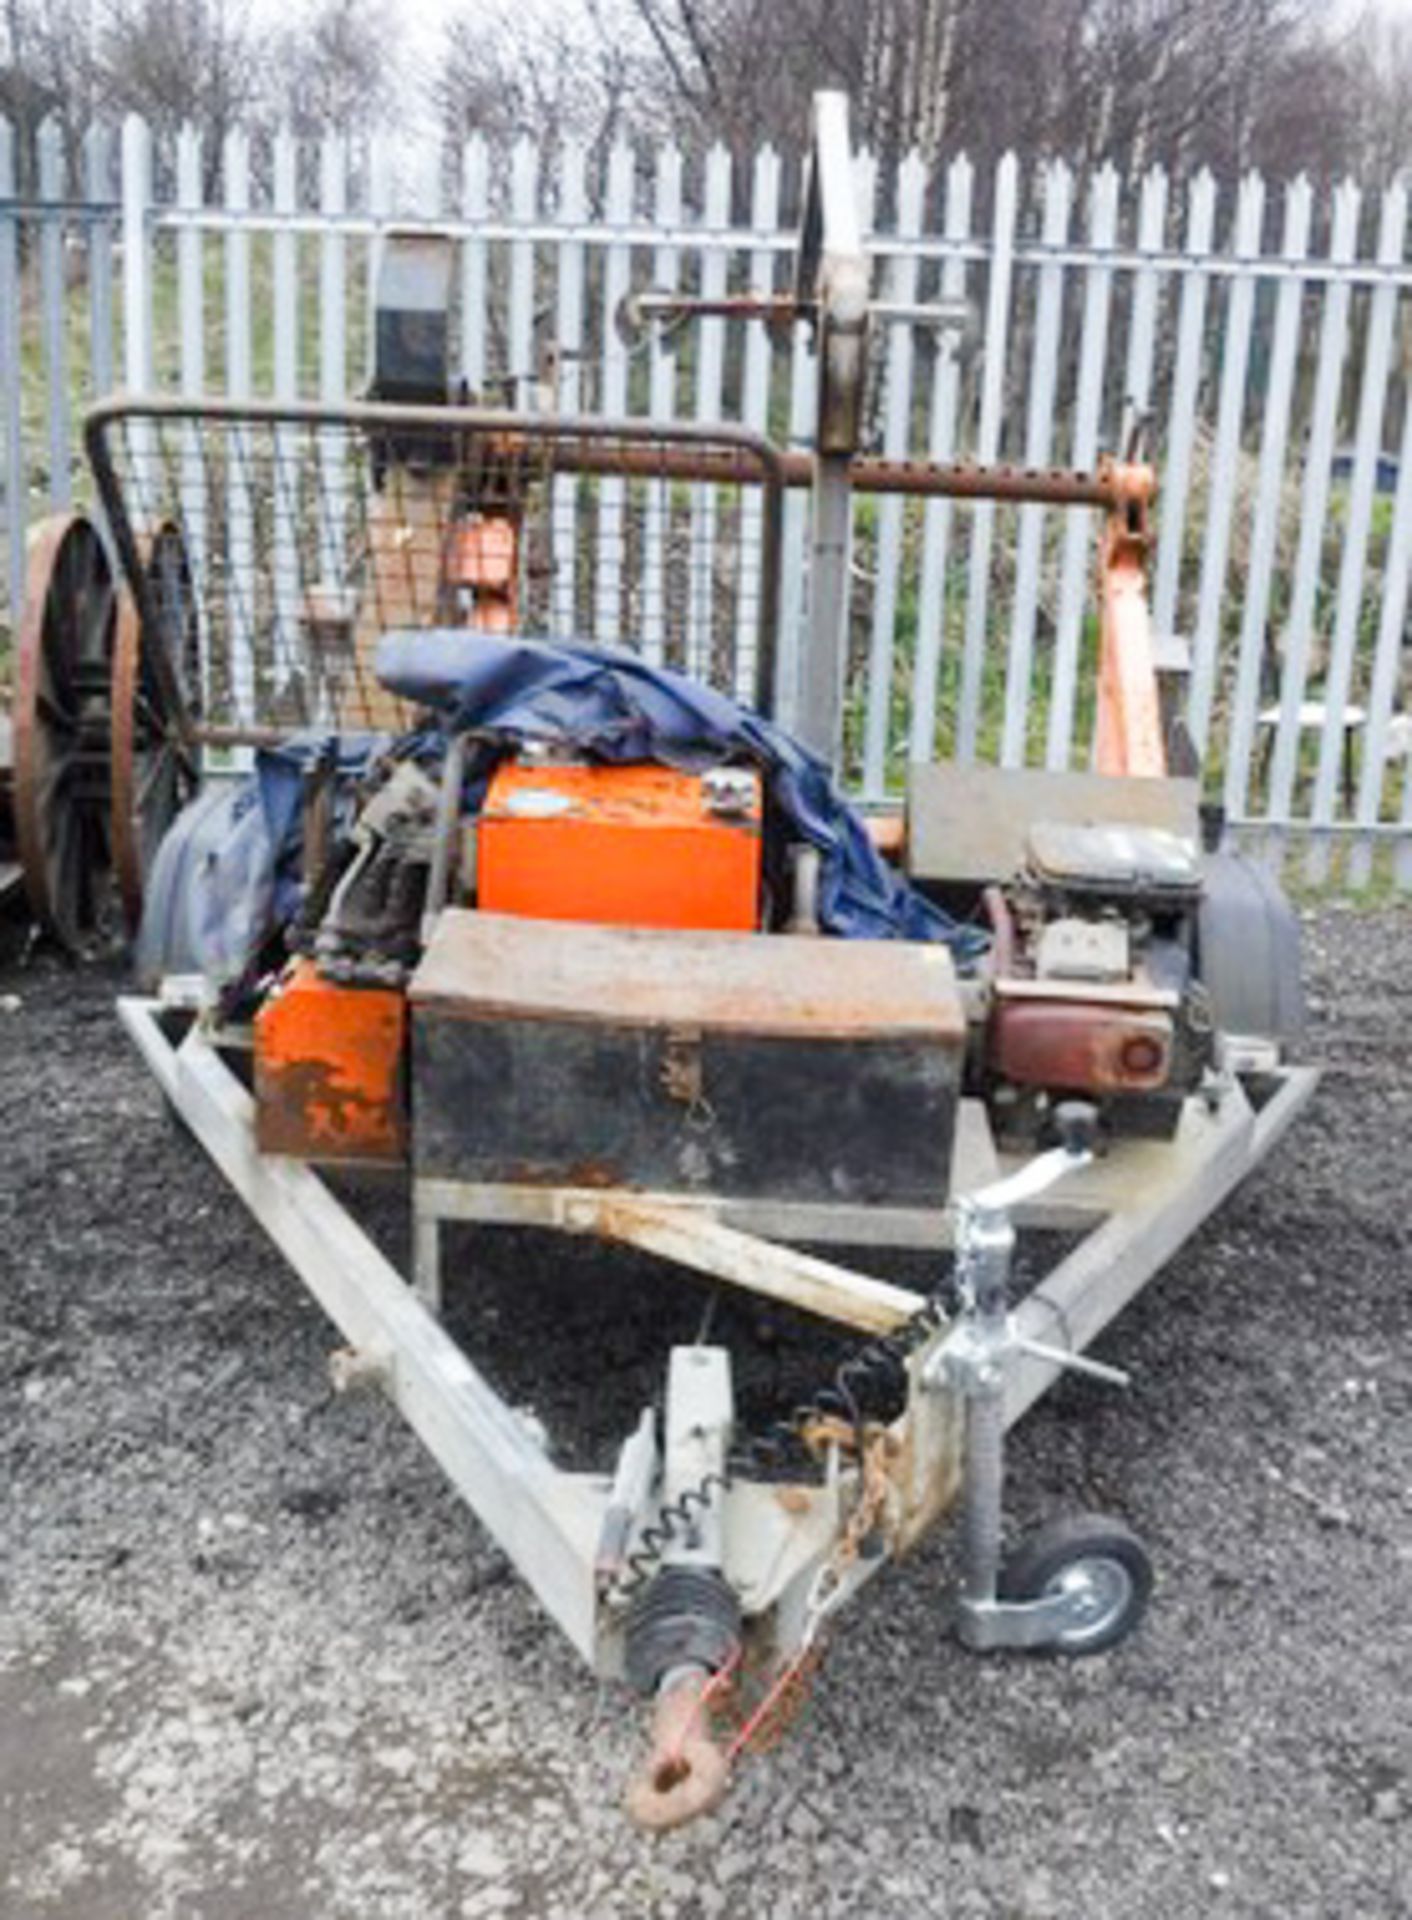 CLYDESDALE CABLE WINCH TRAILER WITH PALLETS OF REELS, S/N 224006080, ASSET NO 747-6016 - Image 3 of 10